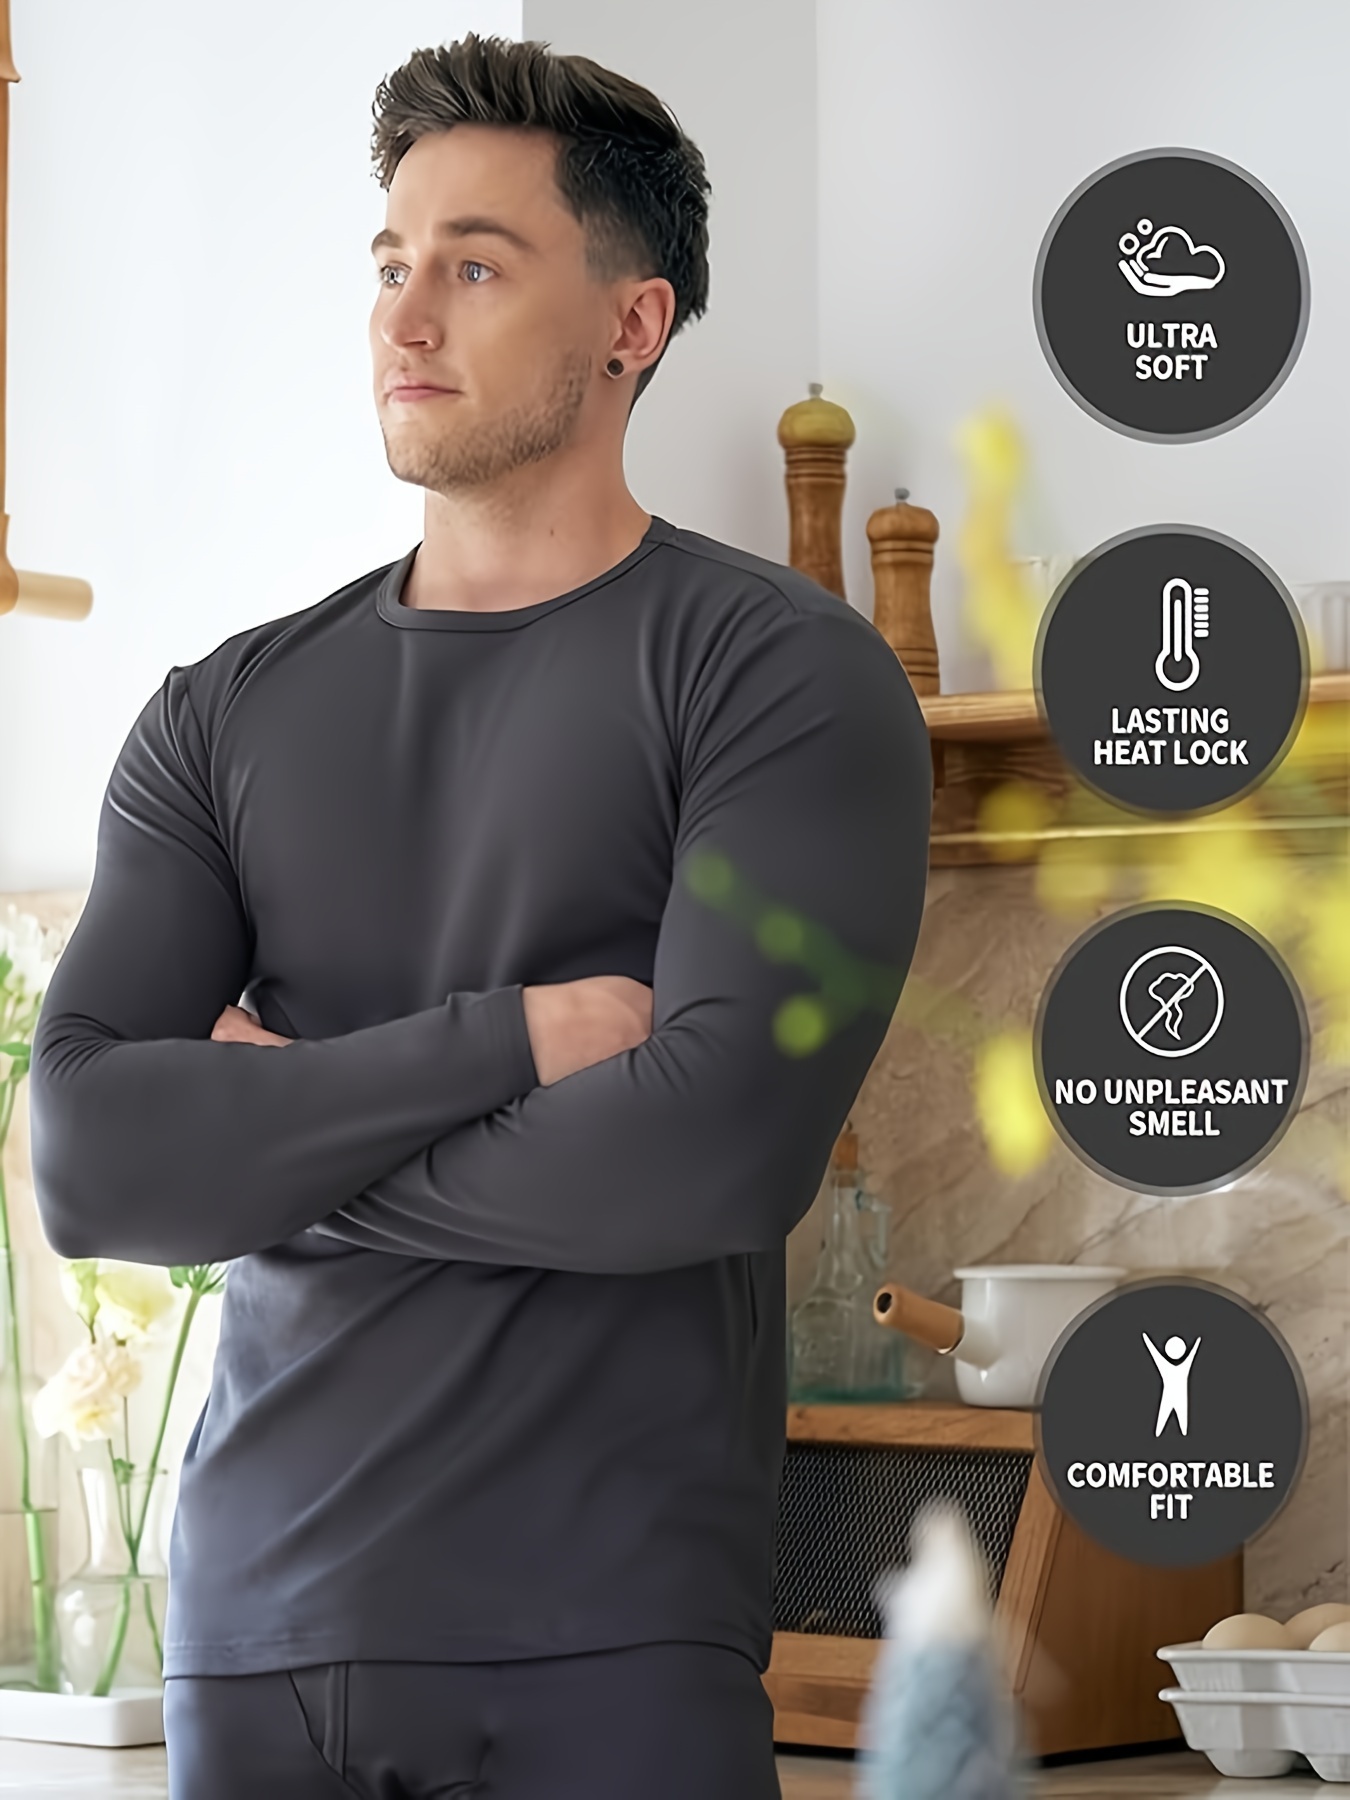 Men Thermal Shirts Long Sleeve Shirts Base Layer Underwear Waffle Cold  Weather